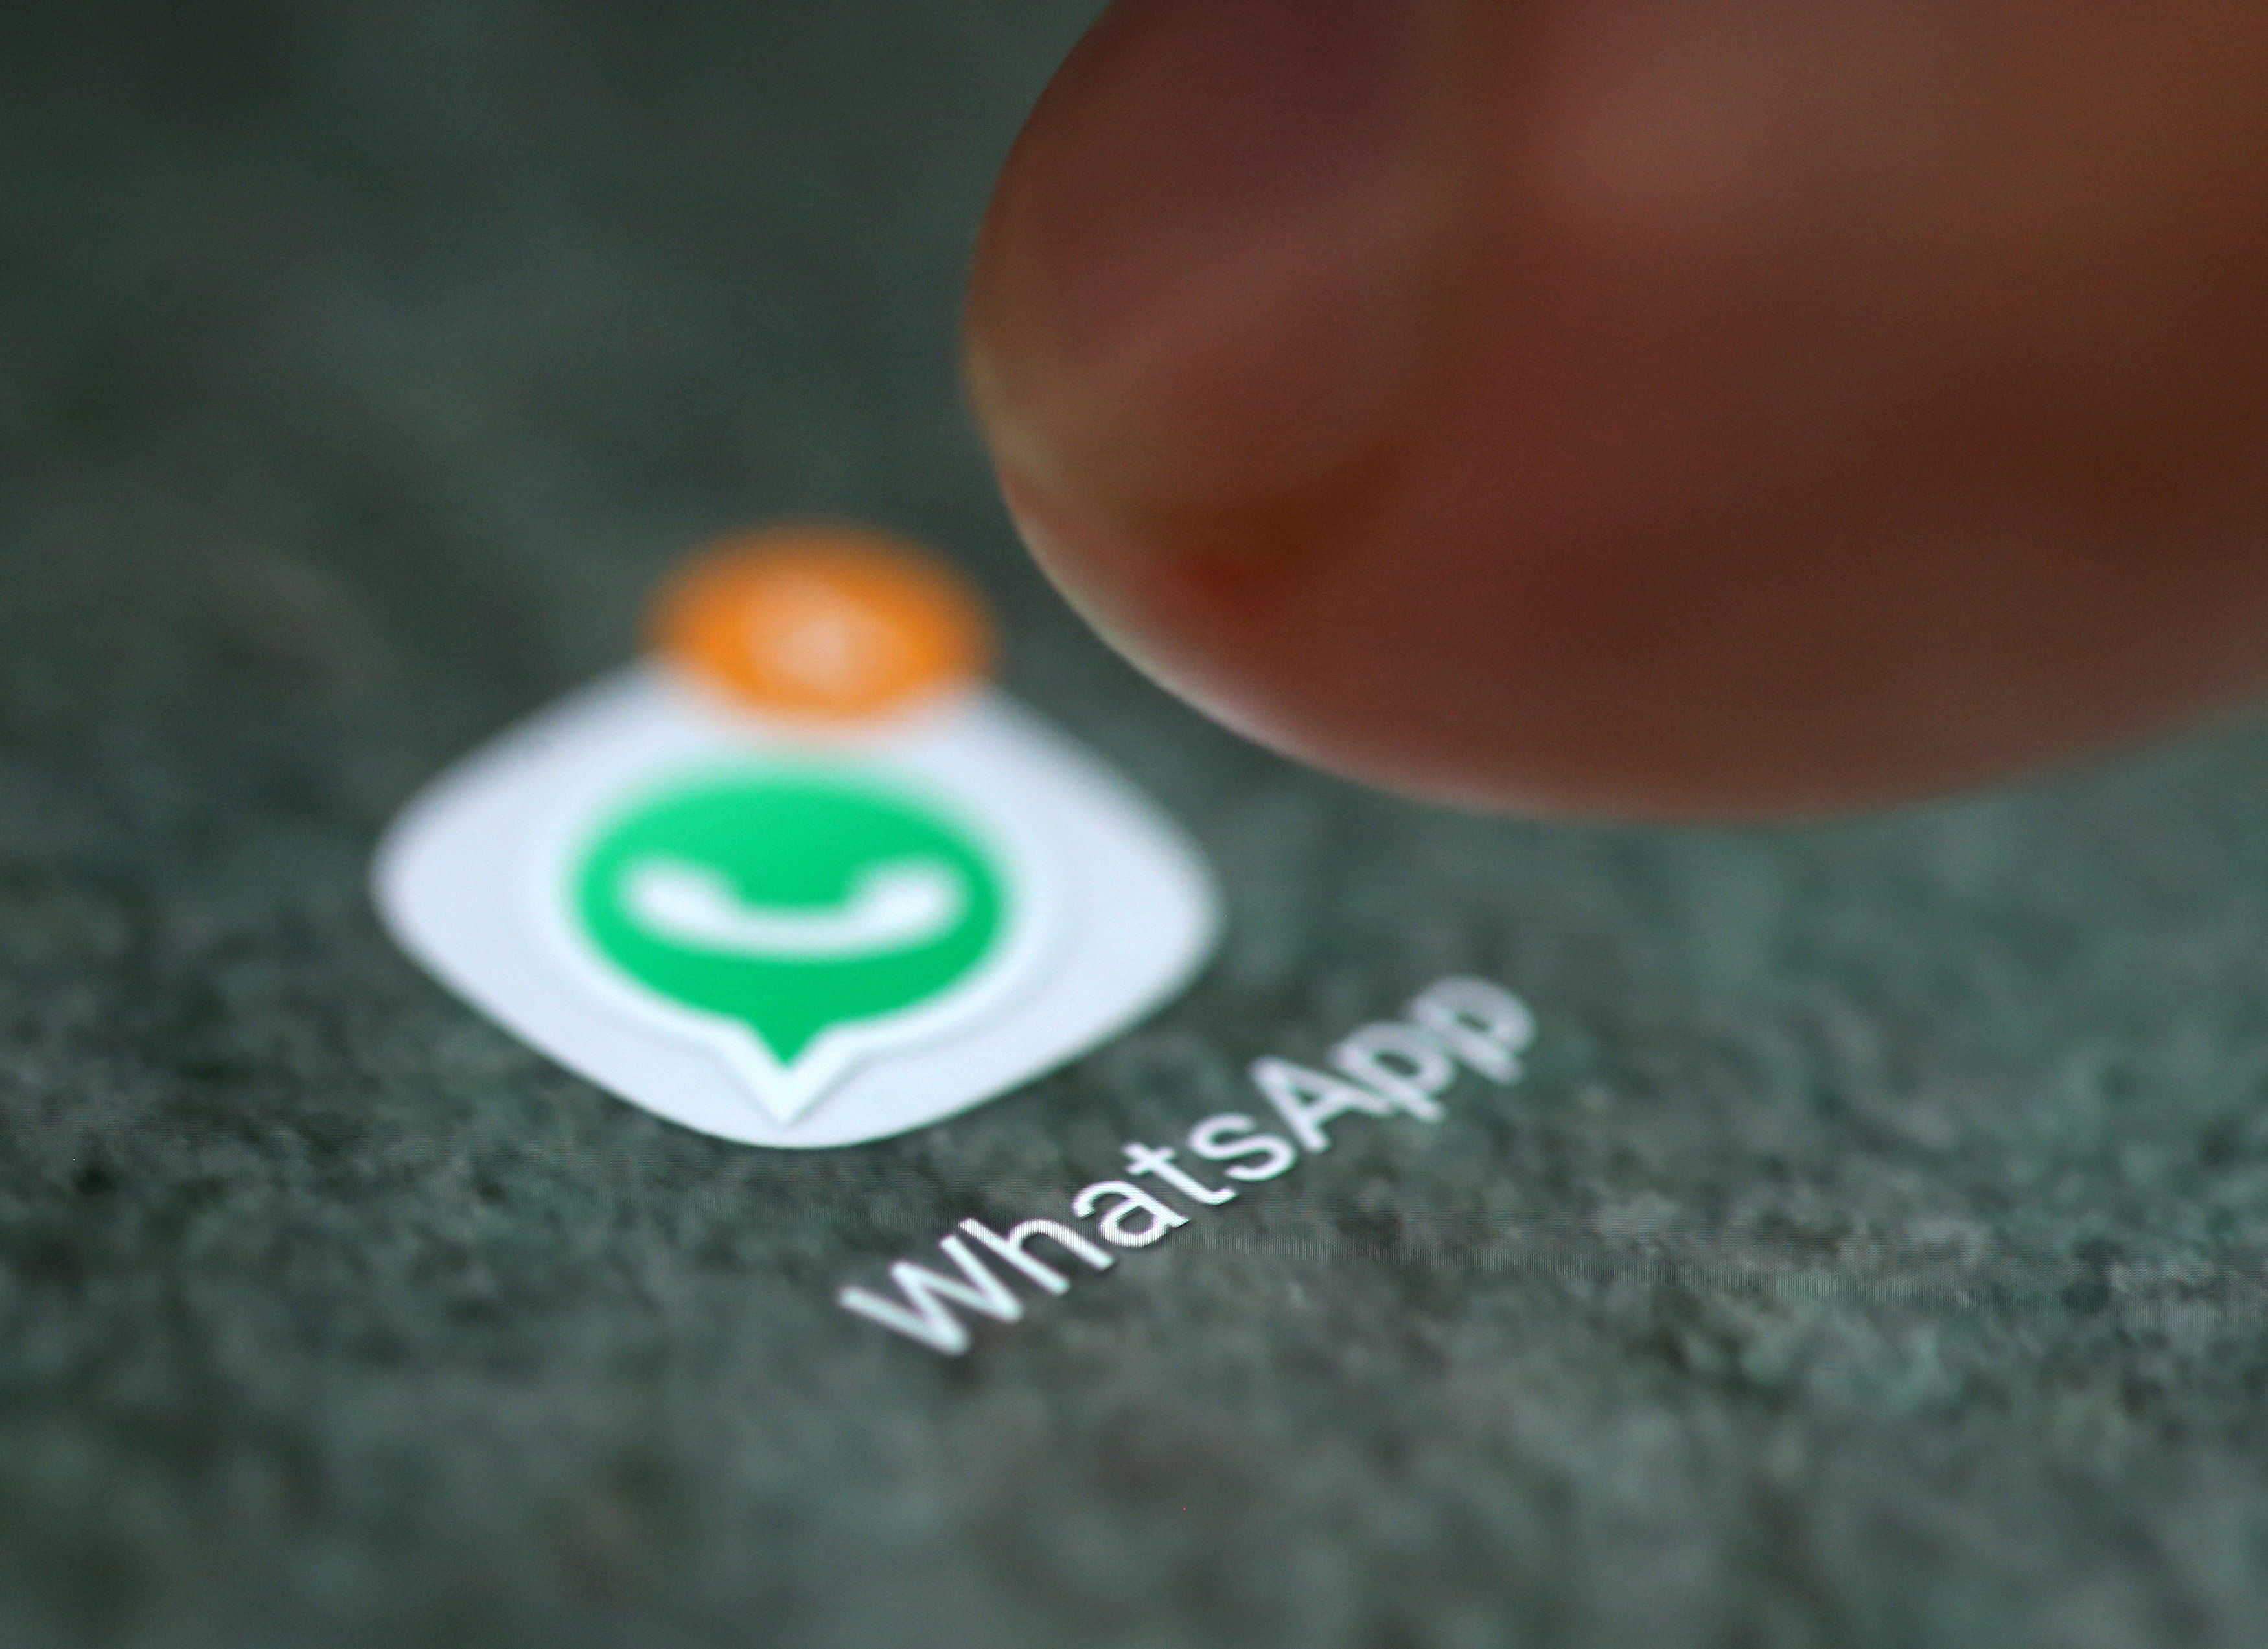 WhatsApp on a phone. Credit: REUTERS FILE PHOTO